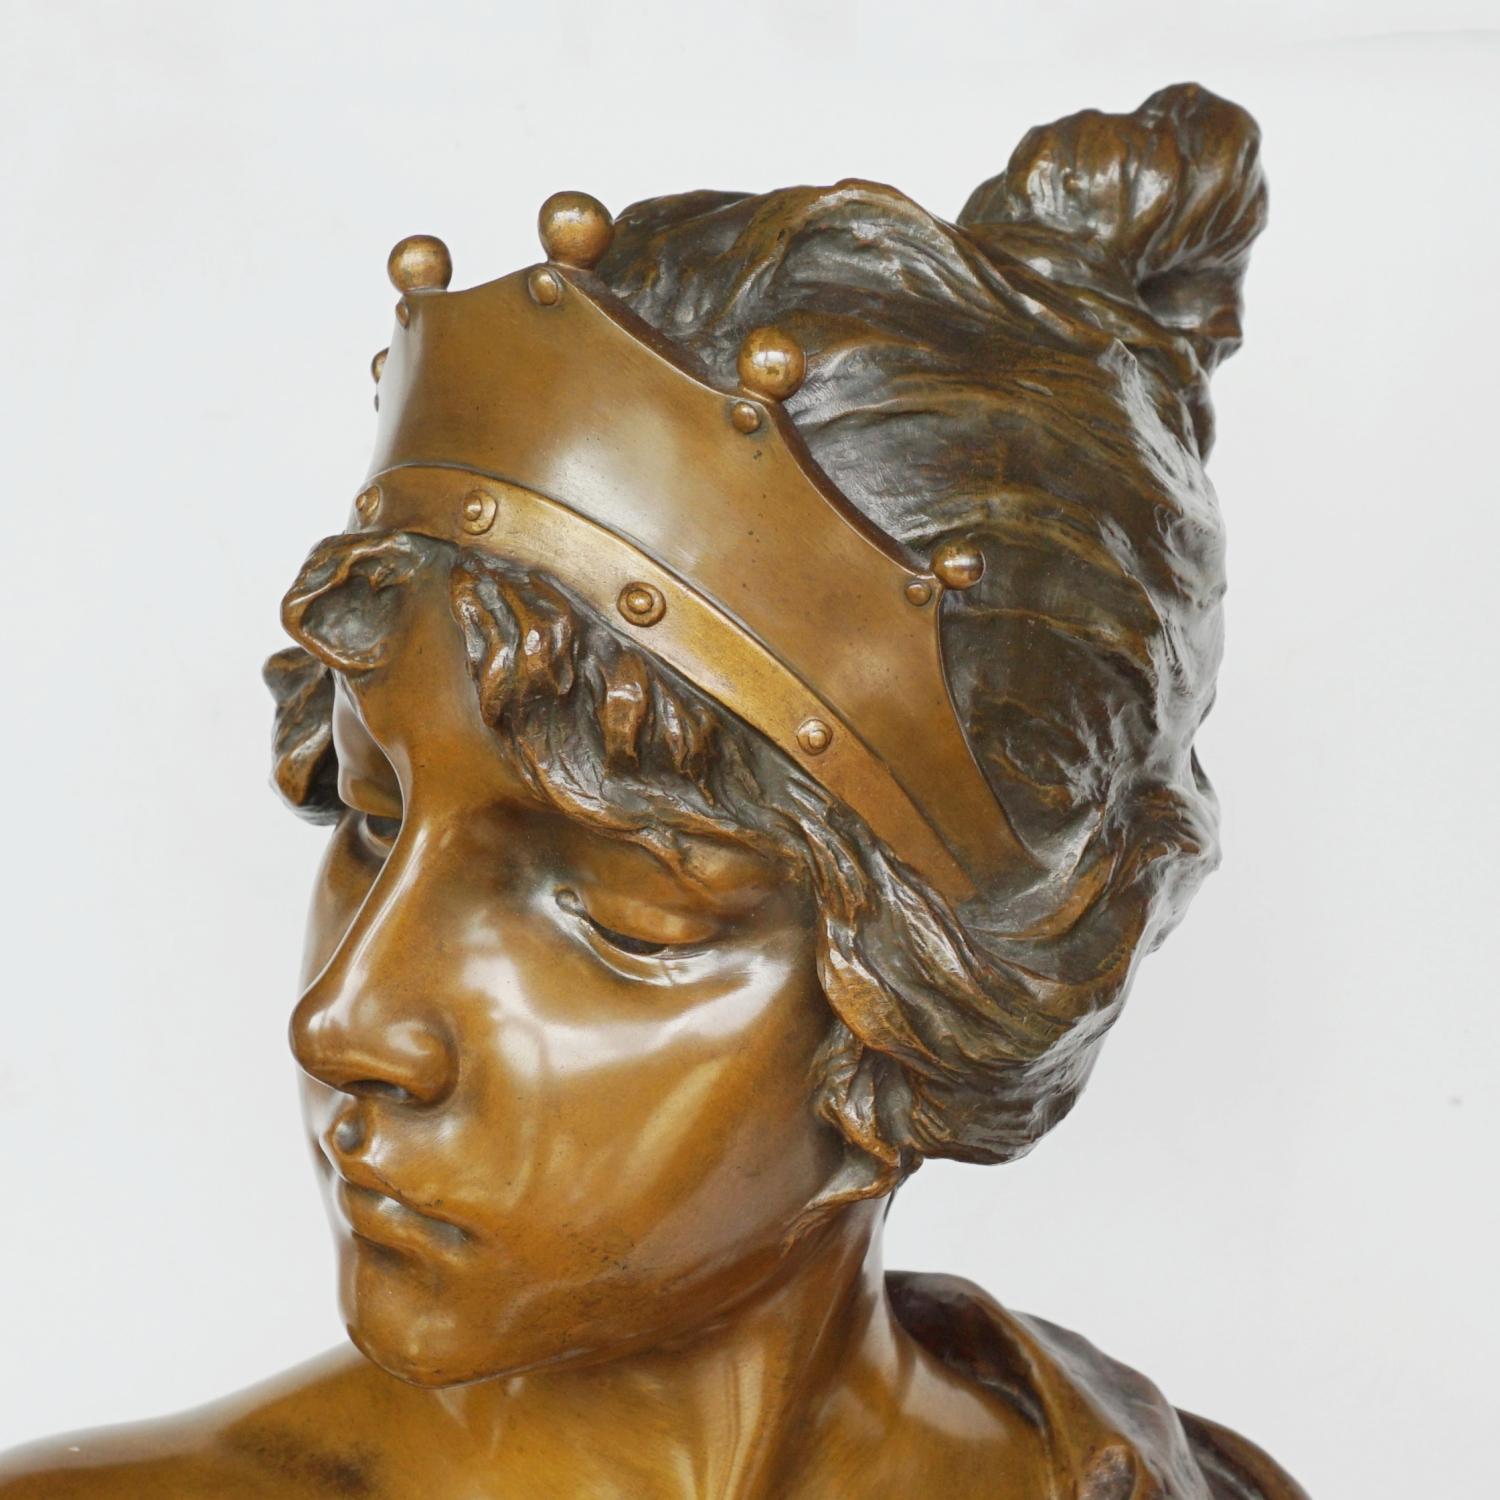 'Lucréce' a large Art Nouveau bronze bust by Emmanuel Villanis (1858-1914). Modelled as a young Lucréce with unkept hair, wearing a diadem with a loose fitted shawl draped around her shoulders. Fine original light and dark brown patination. Signed